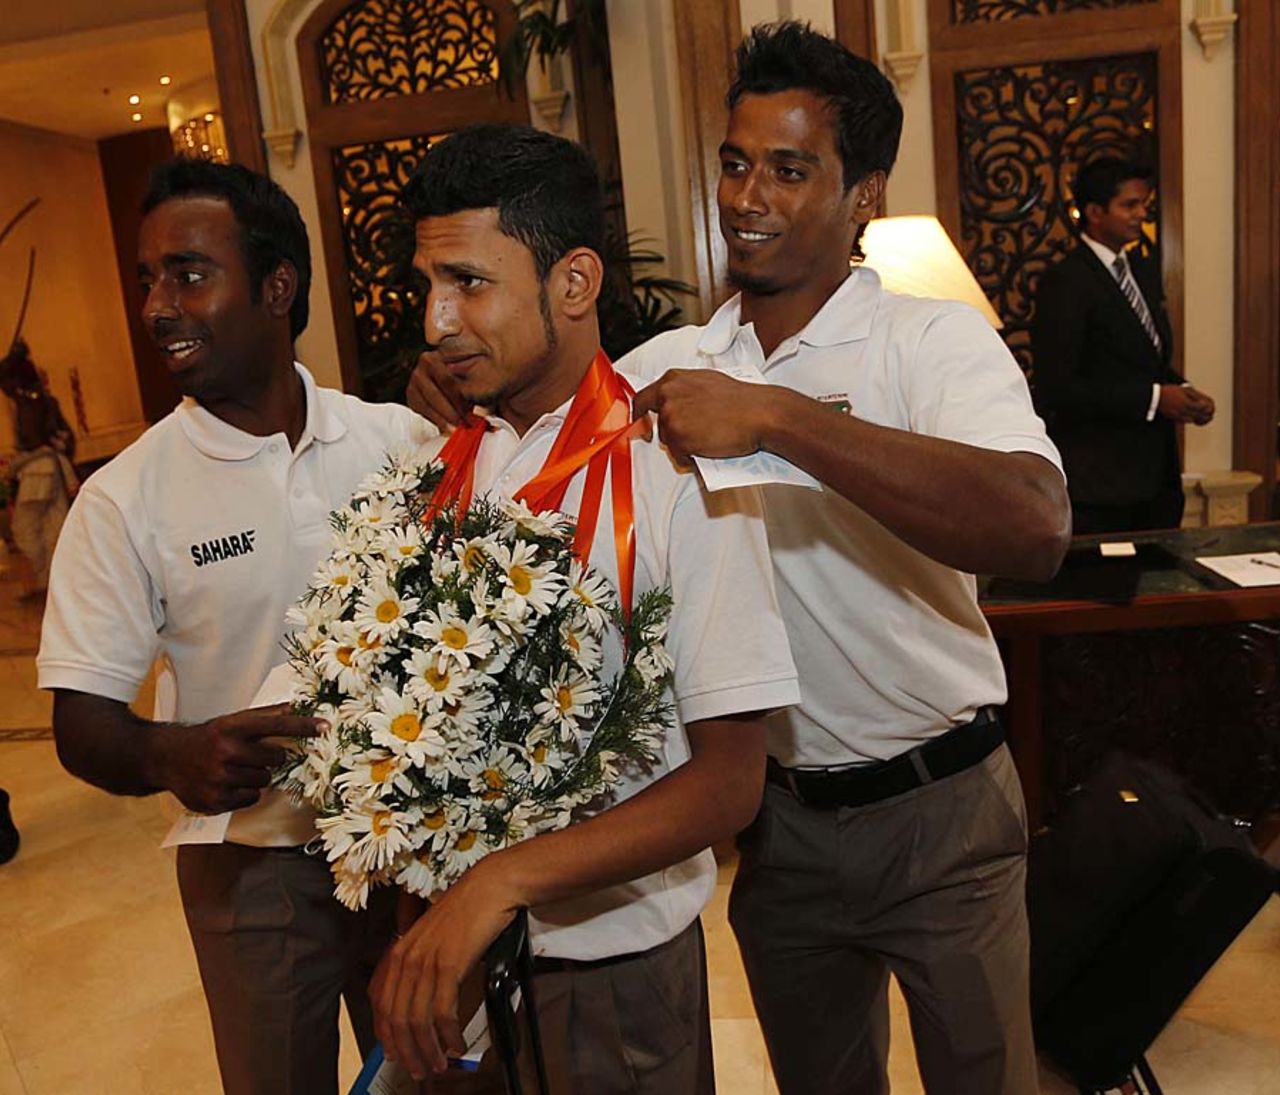 Bangladesh players share a light moment after arrival in Sri Lanka, Colombo, February 28, 2013